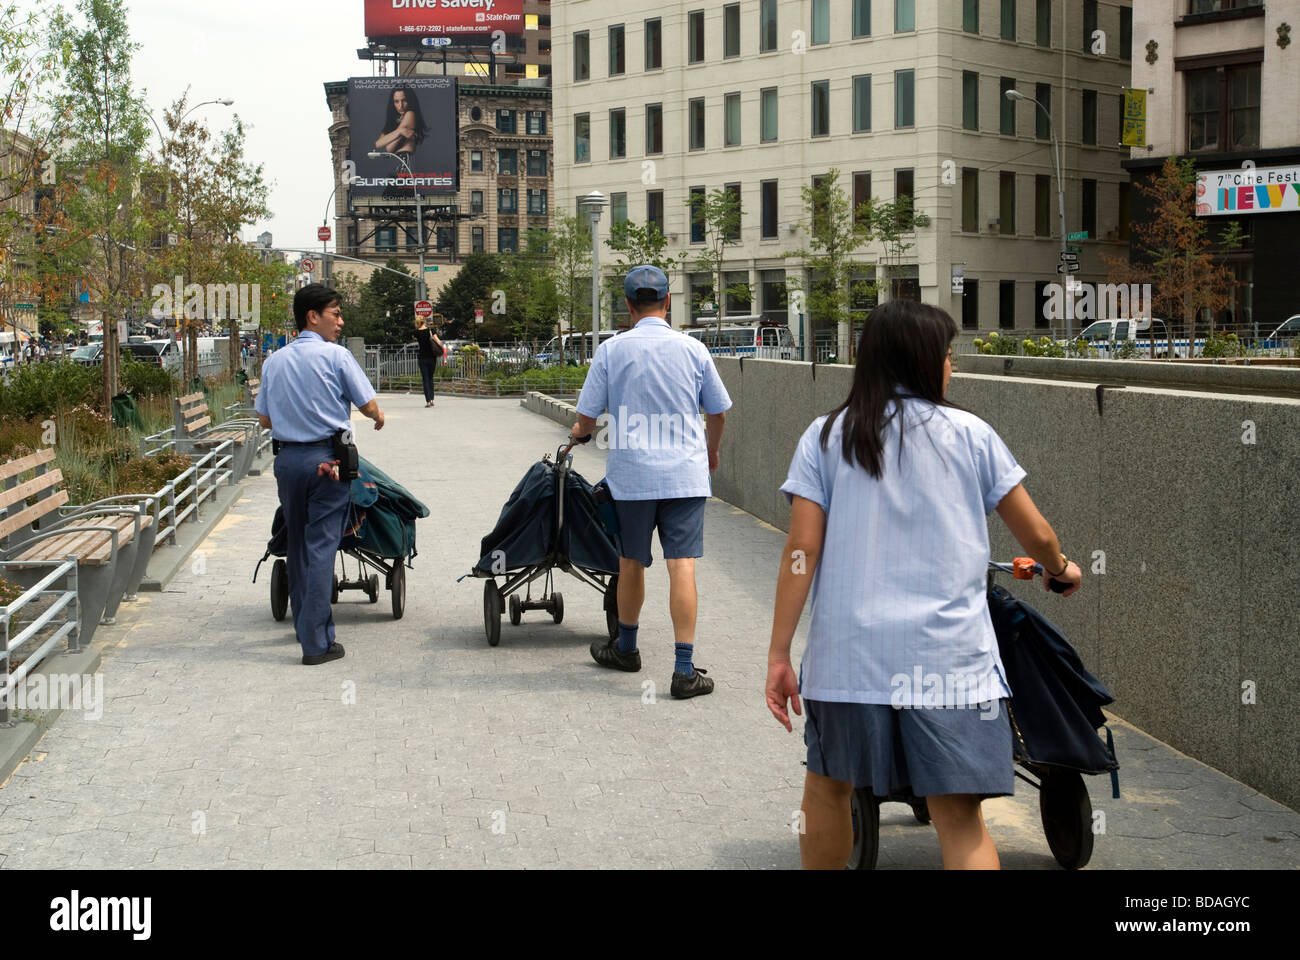 USPS mail carriers walk through CaVaLa Park in the New York neighborhood of Tribeca Stock Photo